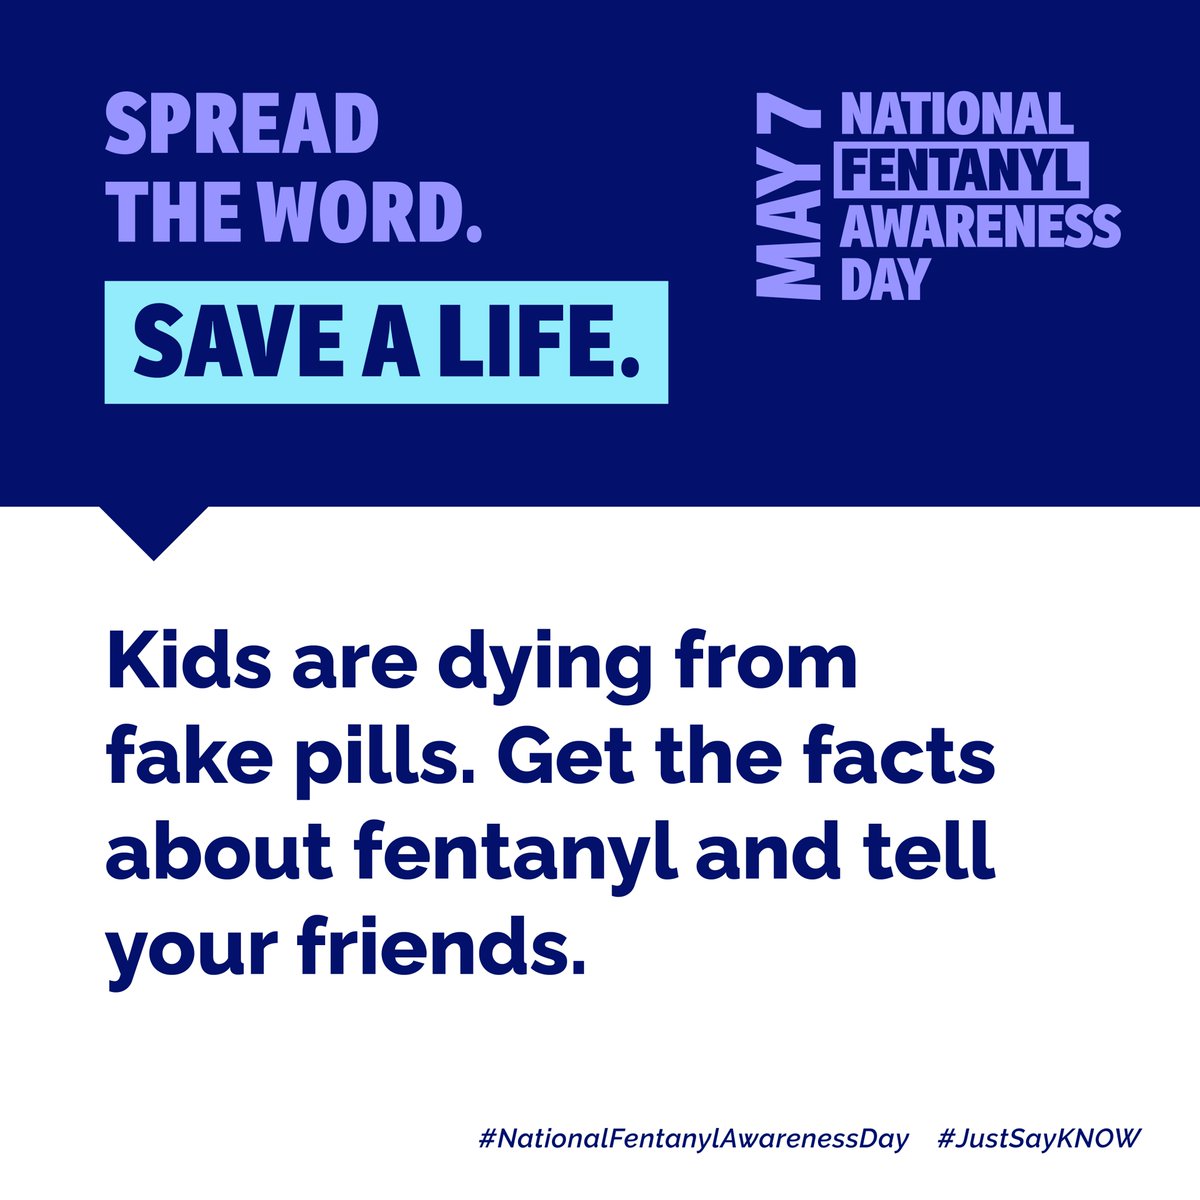 Today, we remember and raise awareness for National Fentanyl Awareness Day. Let's educate, advocate, and work together to combat the dangers of this potent opioid. #FentanylAwareness #EndTheStigma'